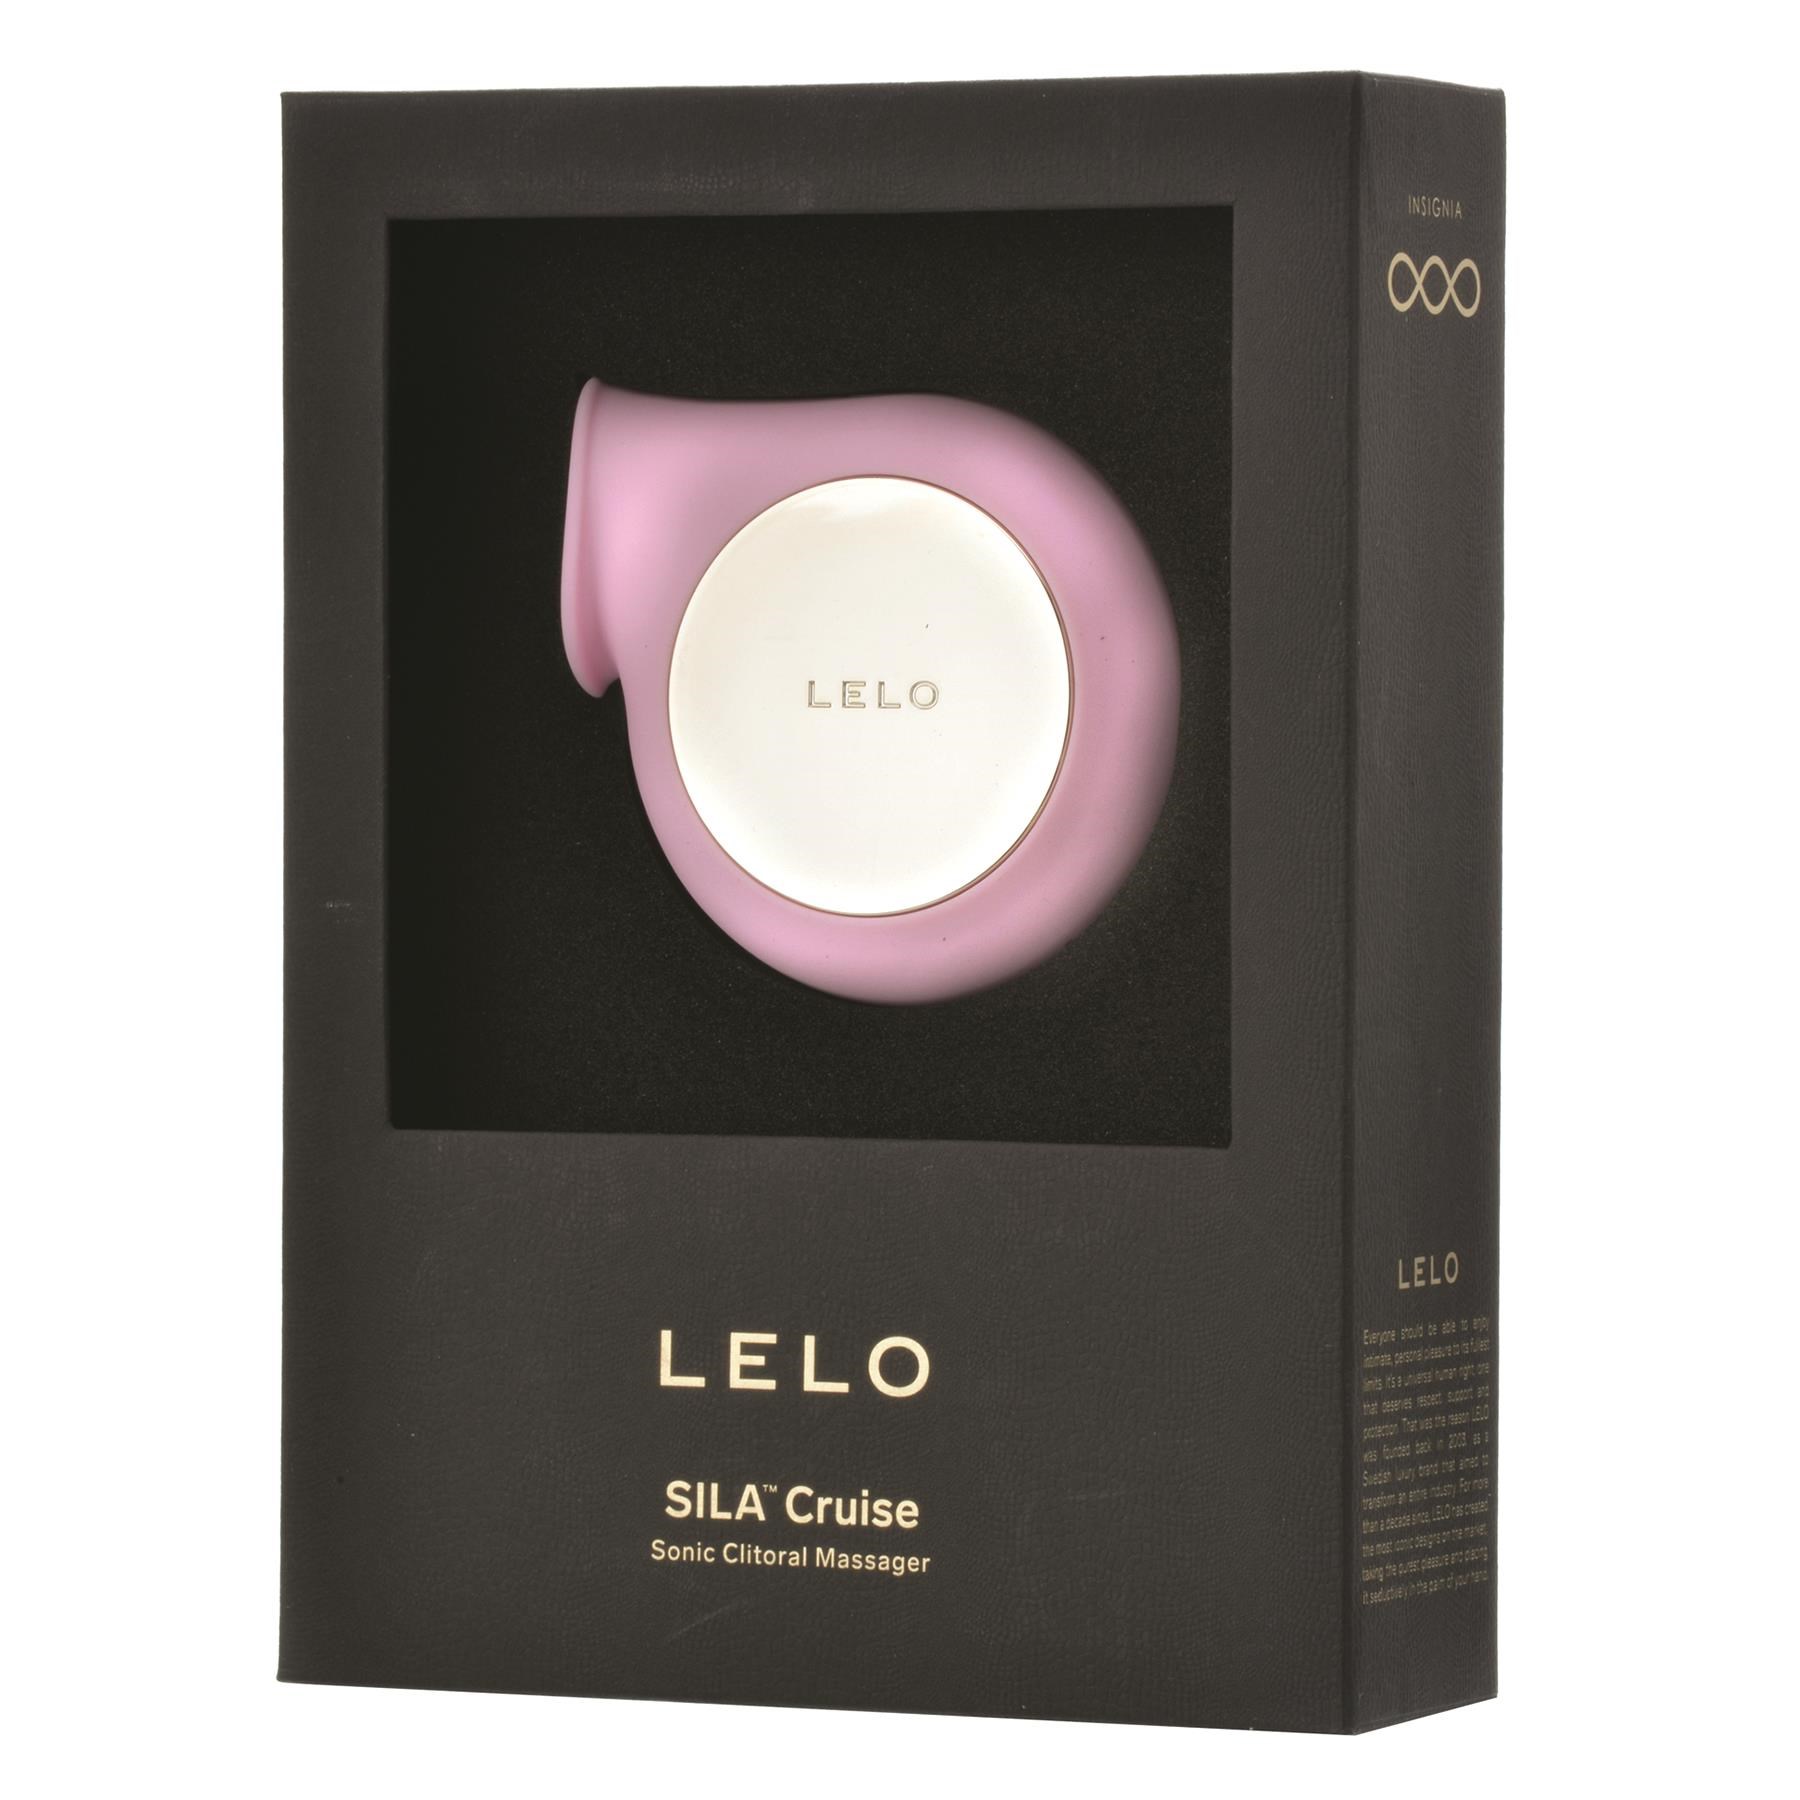 Lelo Sila Cruise Sonic Clitoral Massager - Packaging Shot